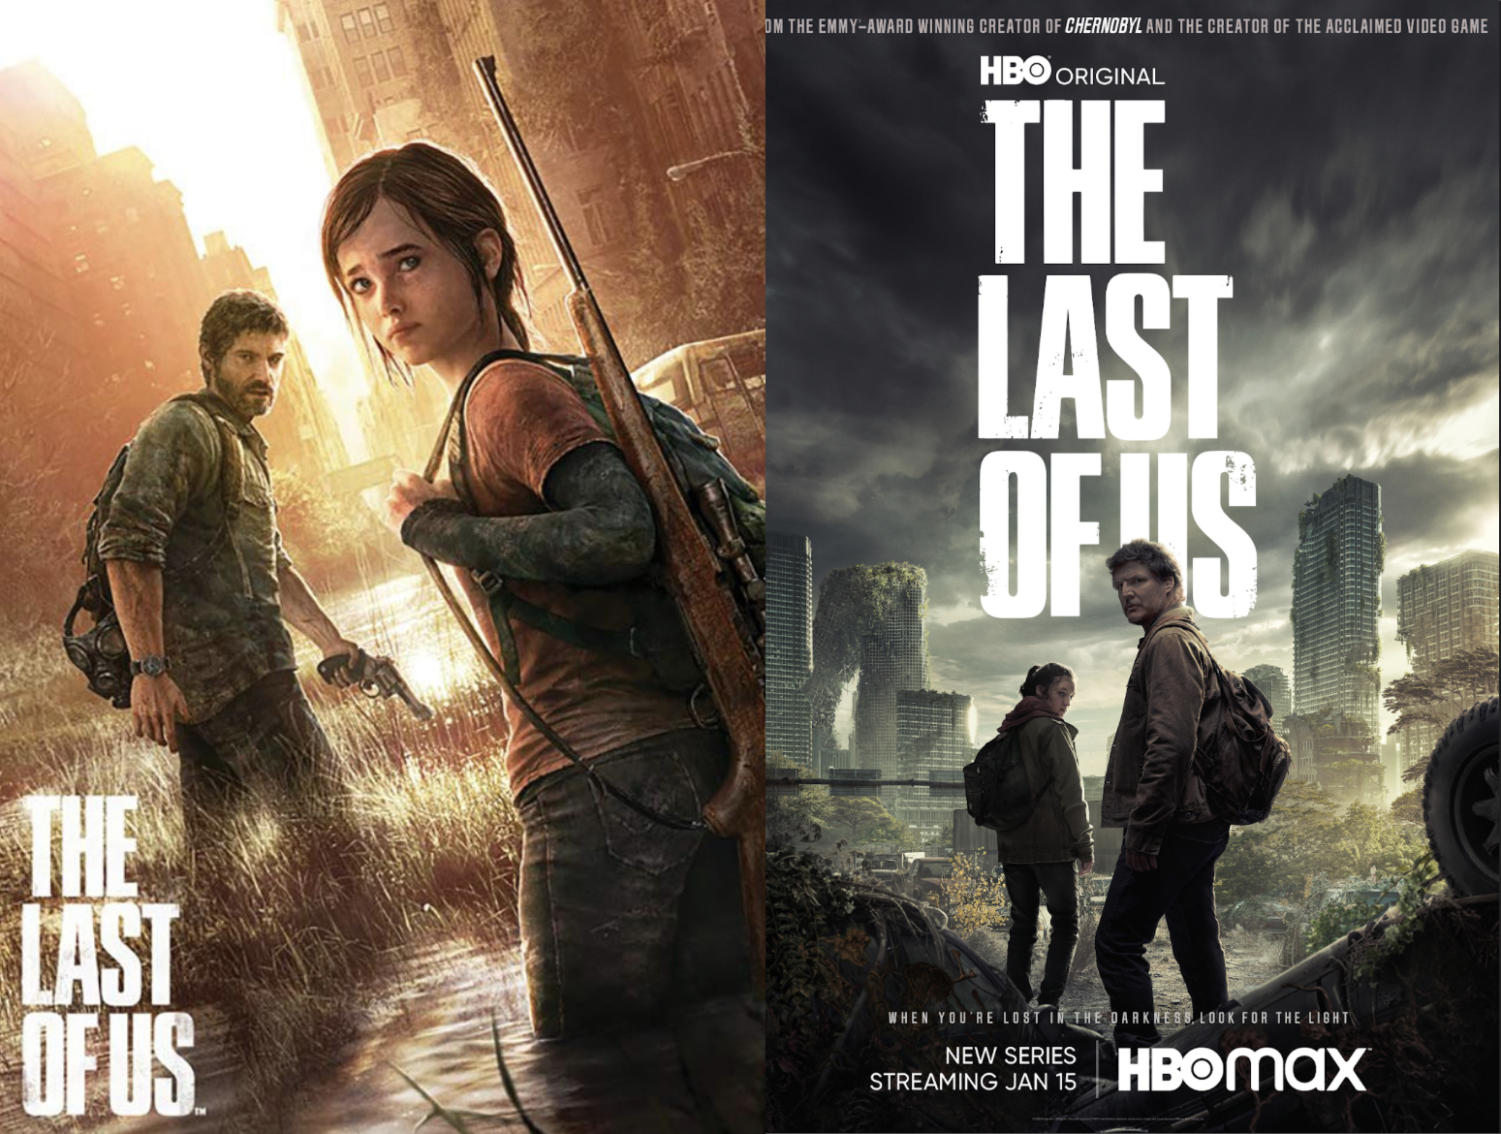 The Last Of Us Season 2 Adapting The Lost Levels Shows How HBO's